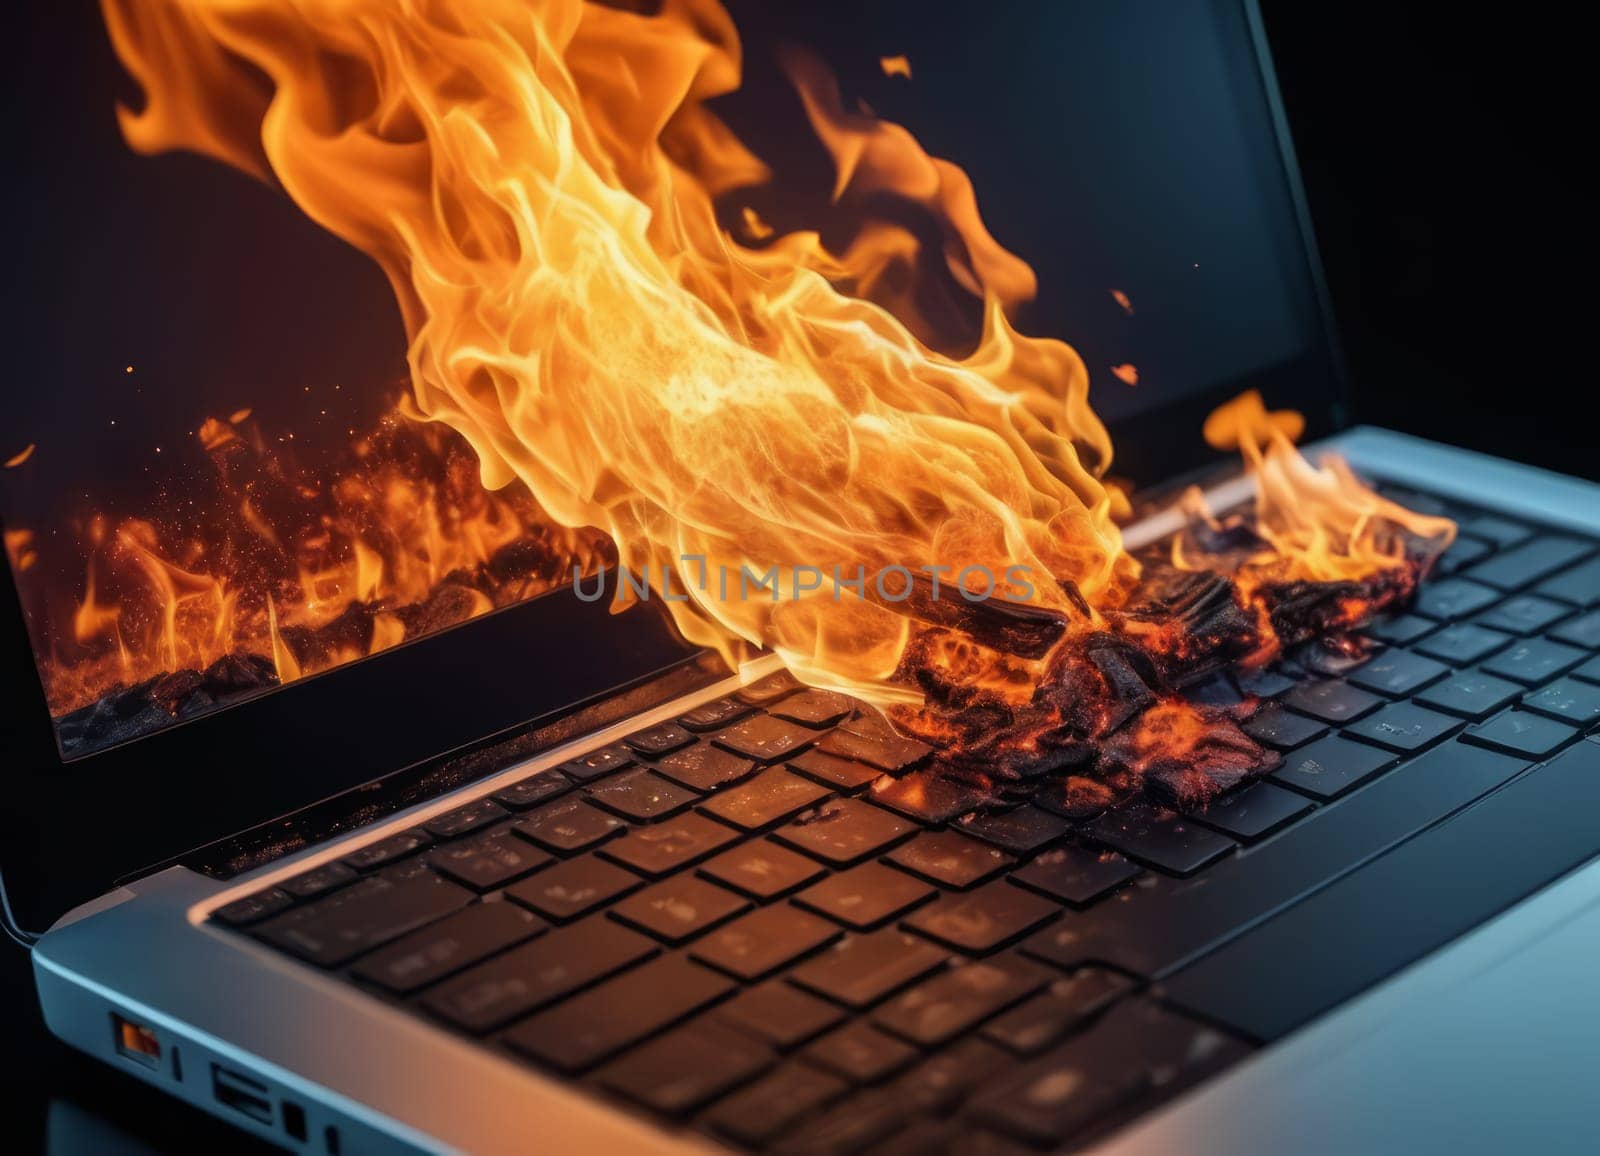 A dramatic image of a blue laptop engulfed in vivid orange and yellow flames, indicating a severe fire hazard or a metaphor for a disastrous situation.